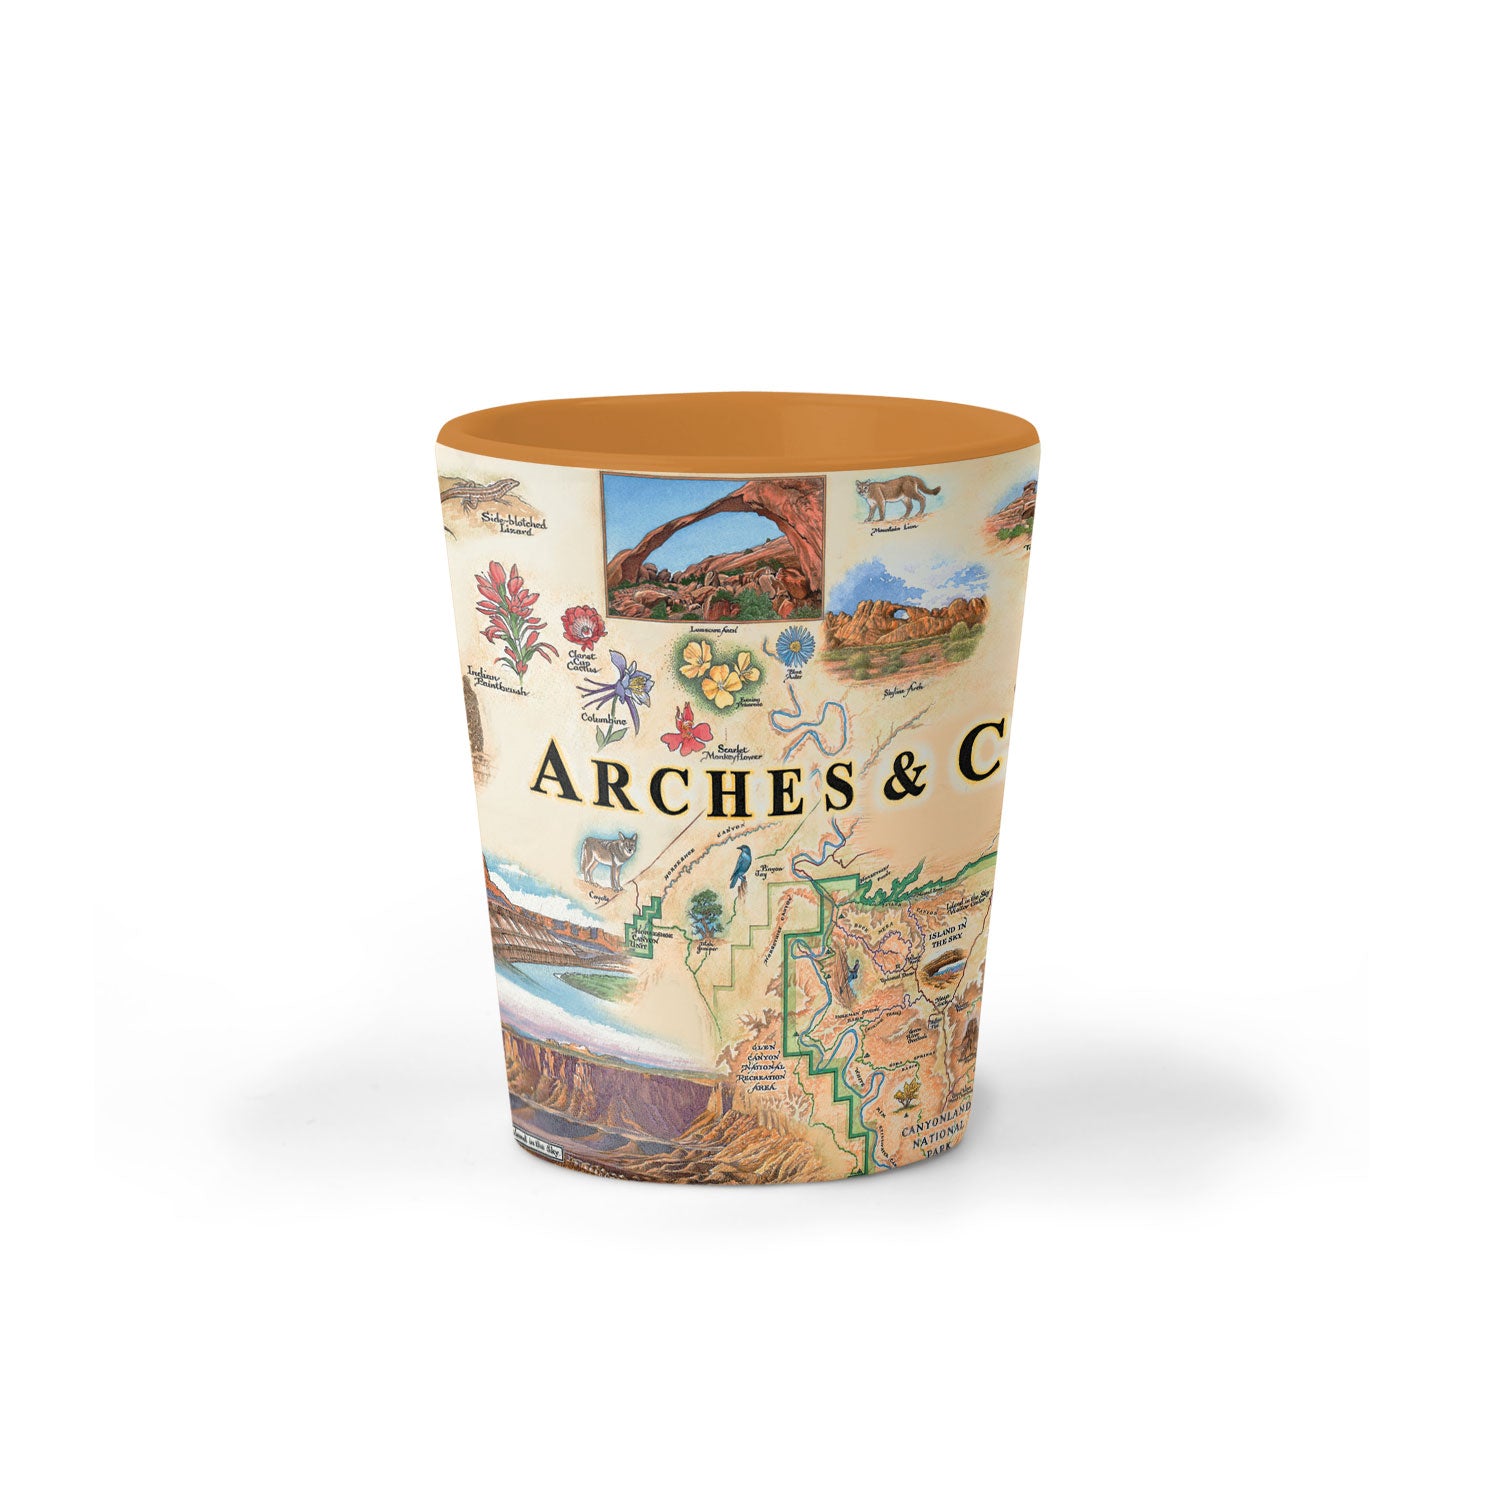 Arches & Canyonlands National Parks map ceramic shot glass in earth tone colors. Arches & Canyonlands National Parks map ceramic shot glass in earth tone colors of blues and greens. The map features deer, mountain lion, porcupine, bobcats, and a fox. Landmarks are Tower Arch Delicate Arch, Double O Arch, Balanced Rock, Island in the Sky, and Fiery Furnace. 